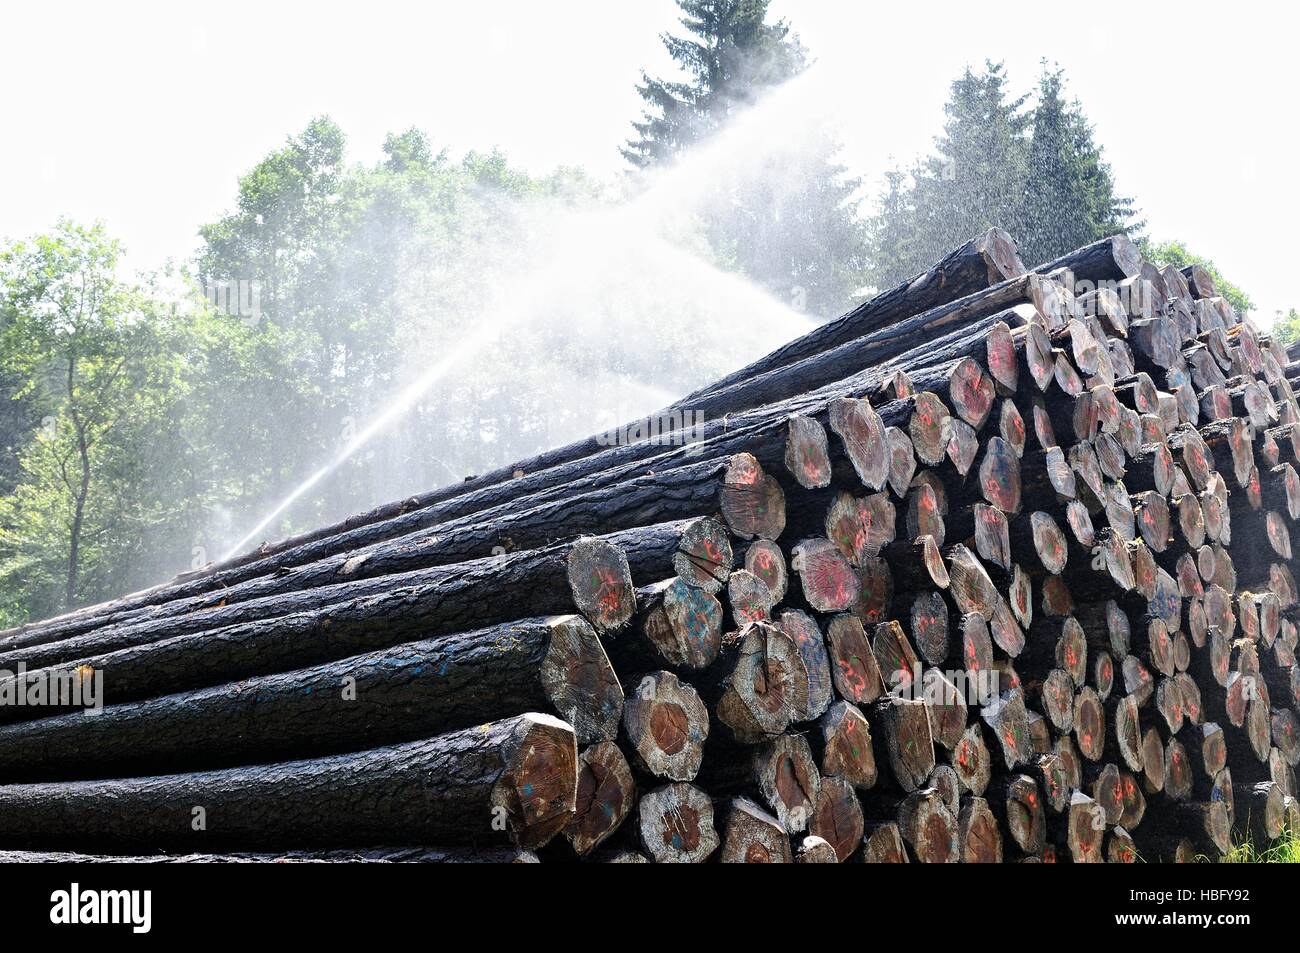 Timber yard with sprinkler system Stock Photo